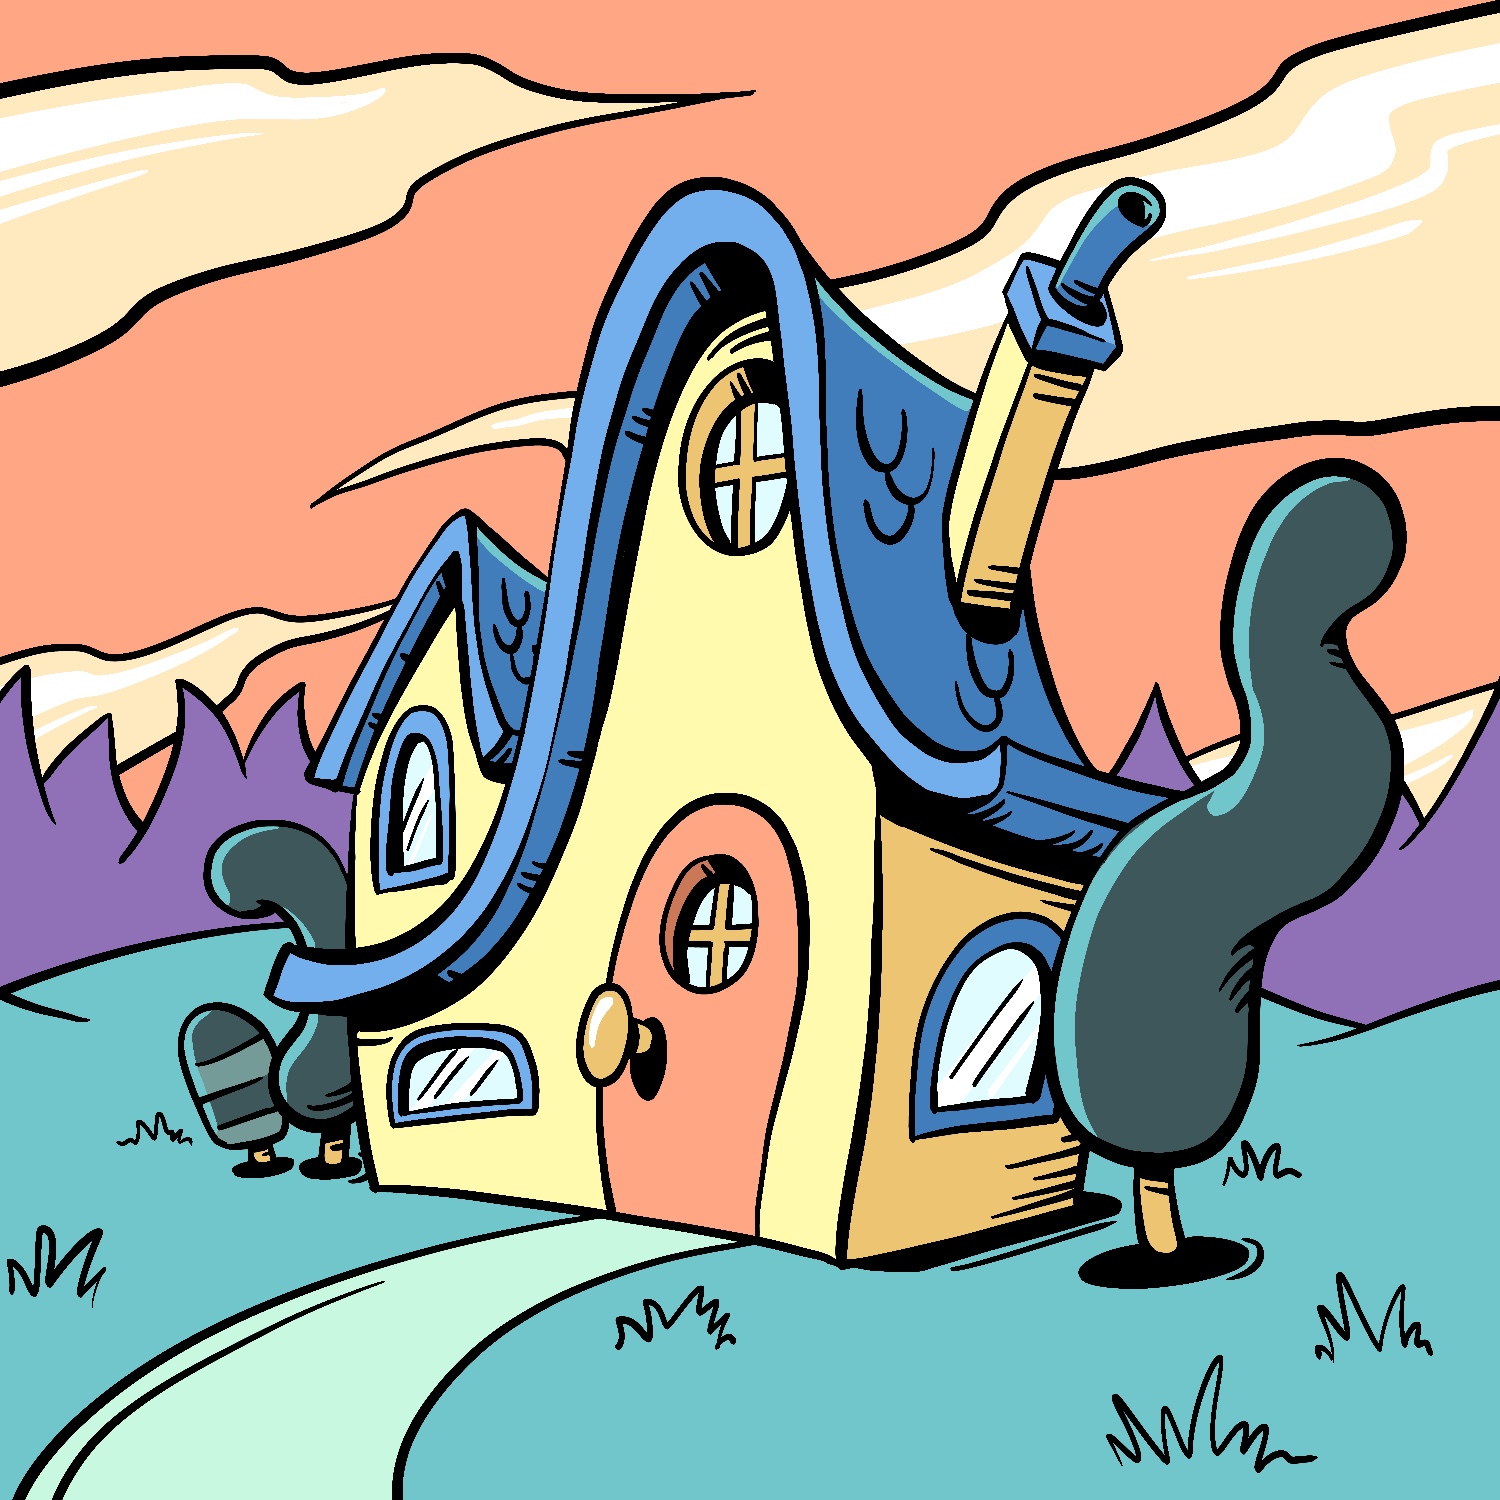 A cartoon illustration of a fantasy house drawn in the style of Dr. Seuss. The house is yellow with a salmon-colored door and sloping blue roof. The roof has a very unrealistic curve to it, sloping up at the apex and down and then up again at the edges. There is a small gable window on the left side, and a chimney angling out of the roof at an impossible angle on the right. The door has an oversized knob and there are windows of various sizes all over the house. The house is flanked by deformed, curvy trees on both sizes, and rests on turquoise grass. A lighter path curves away from the house, and a wall of purple trees lines then background. The sky is salmon-colored, with large pale-yellow clouds angled across.